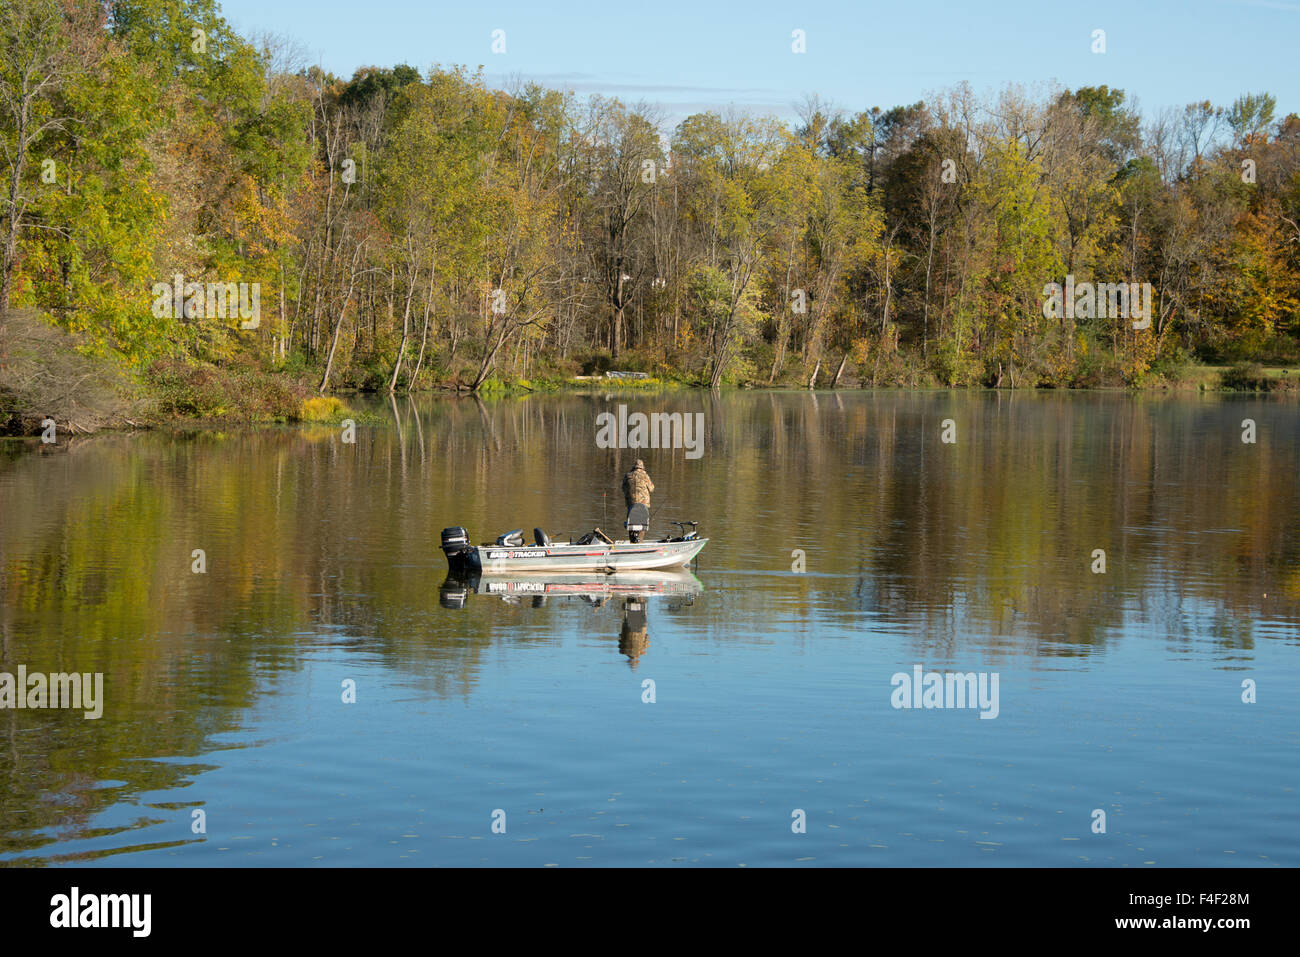 New York, Erie Canal. Autumn fishing on the Erie Canal. (Large format sizes available) Stock Photo